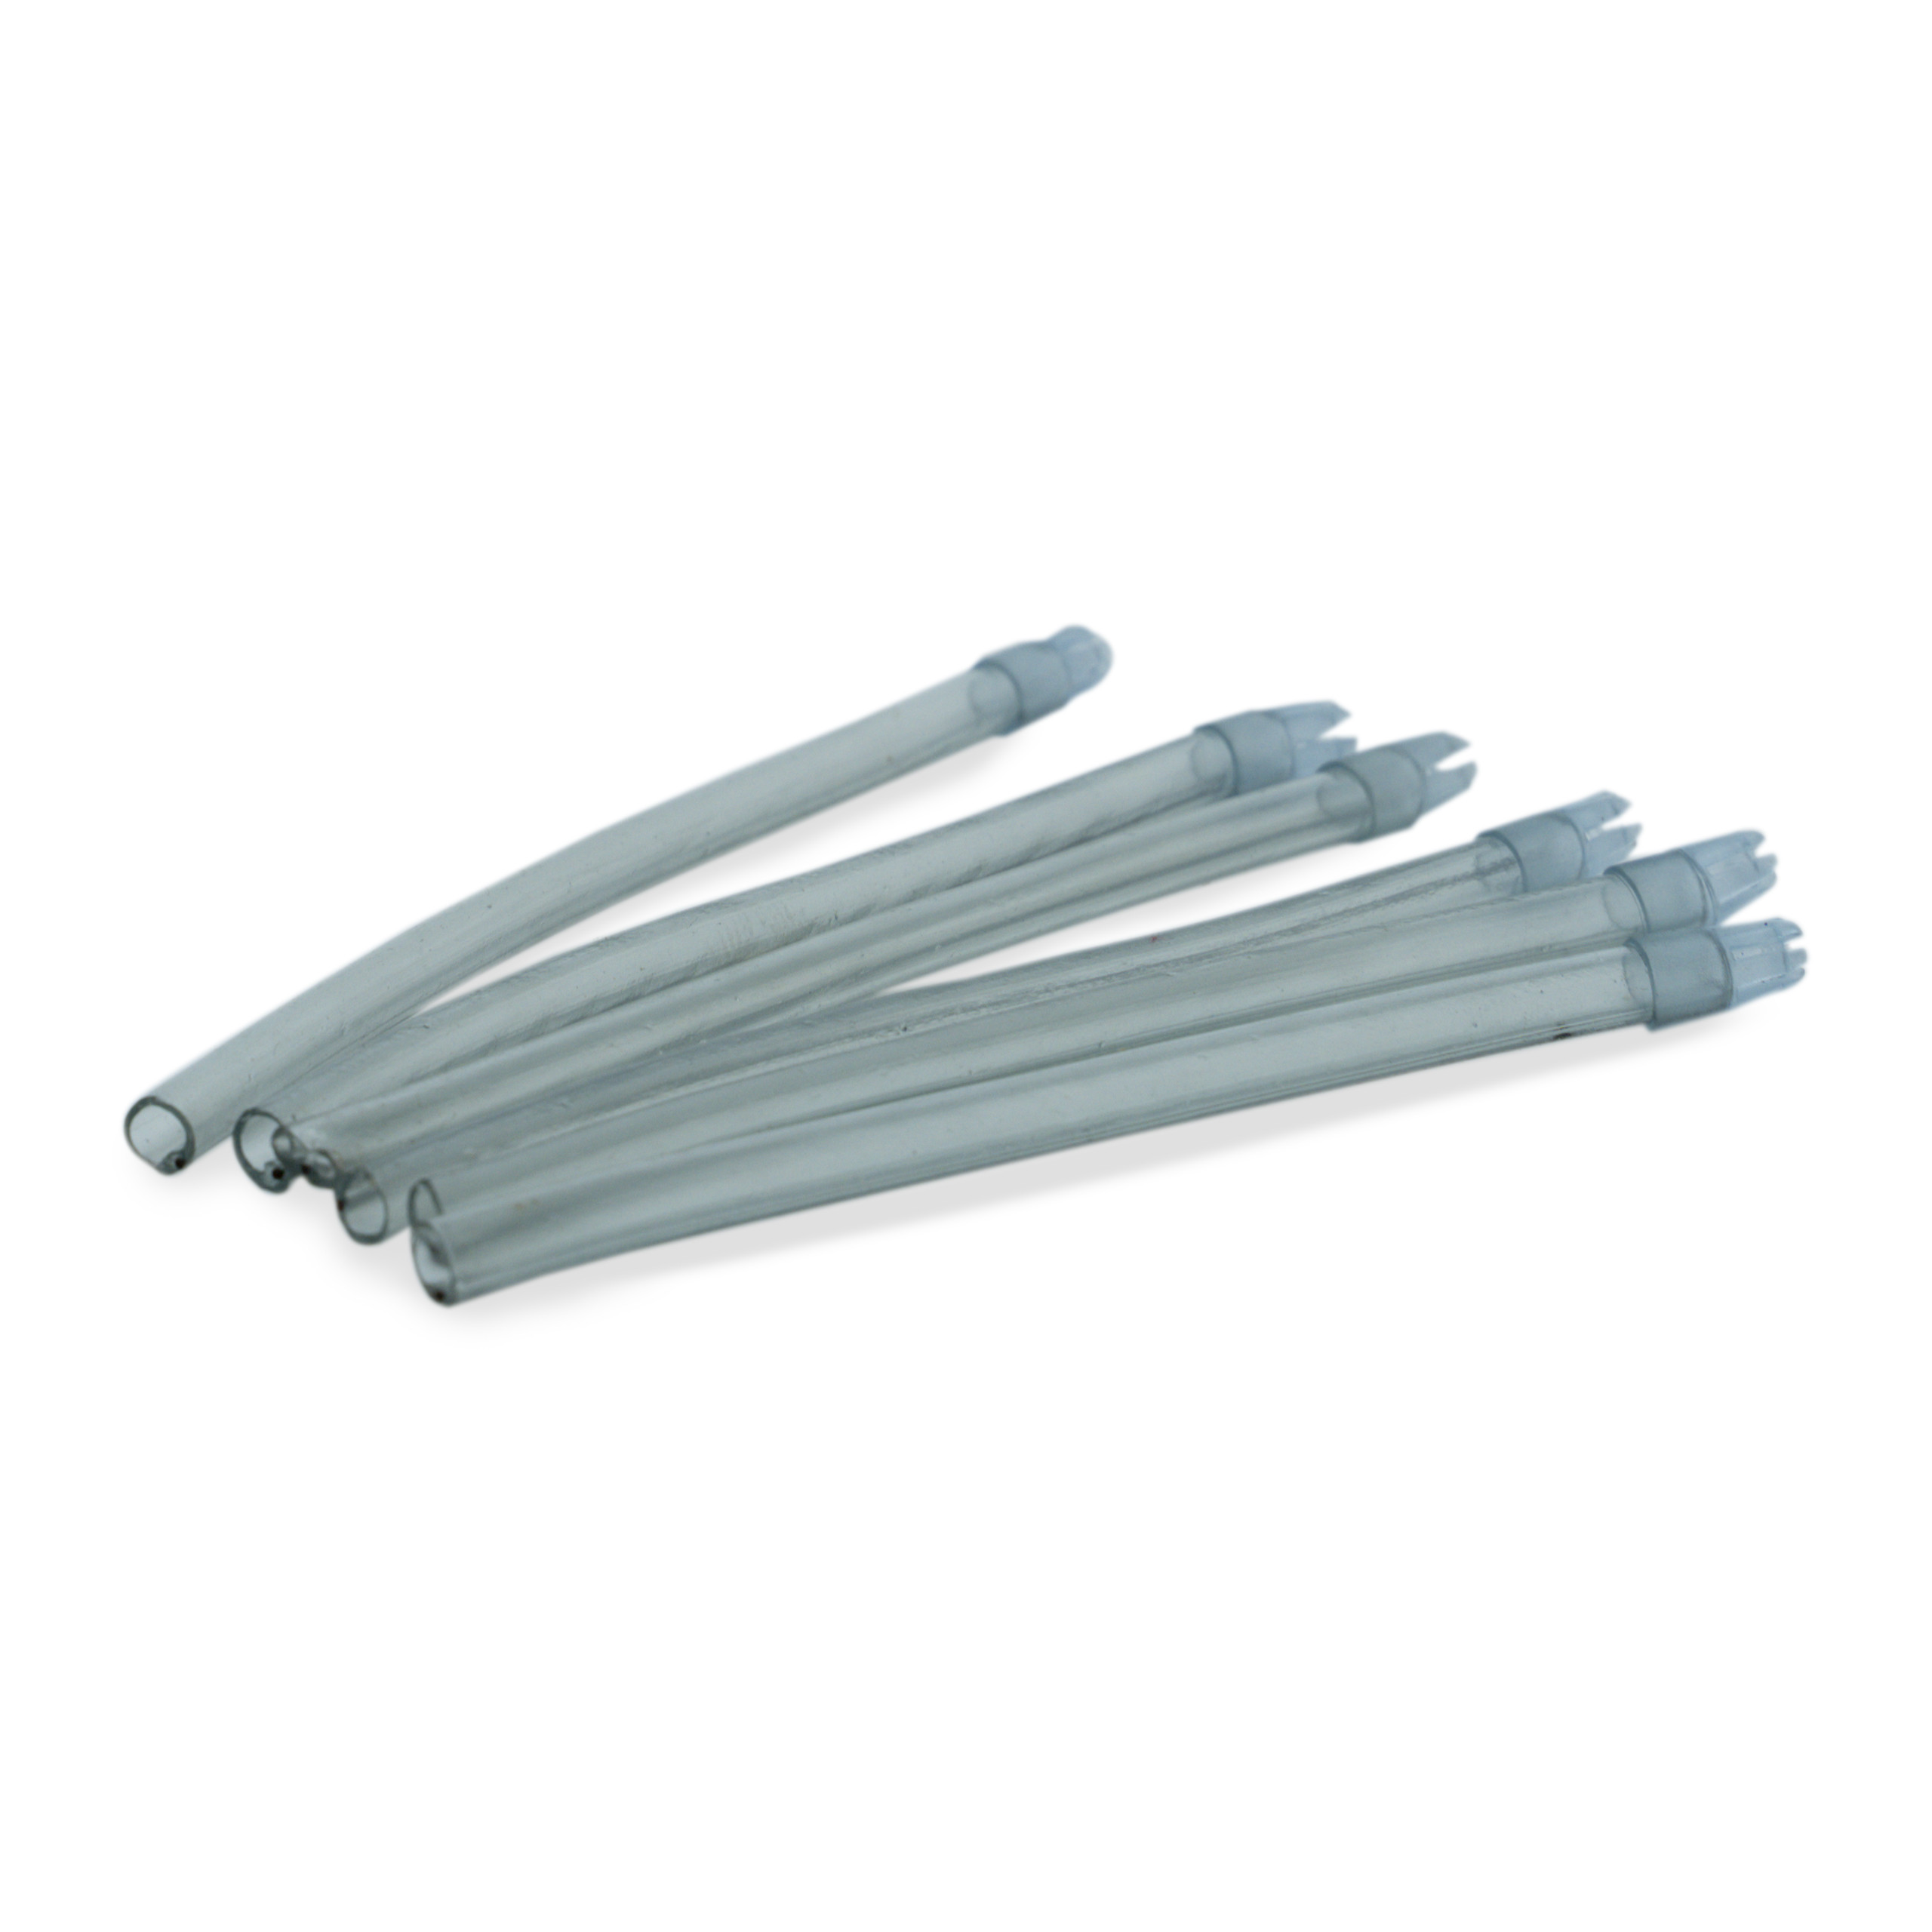 DENMAX Saliva Ejectors Suction Tips